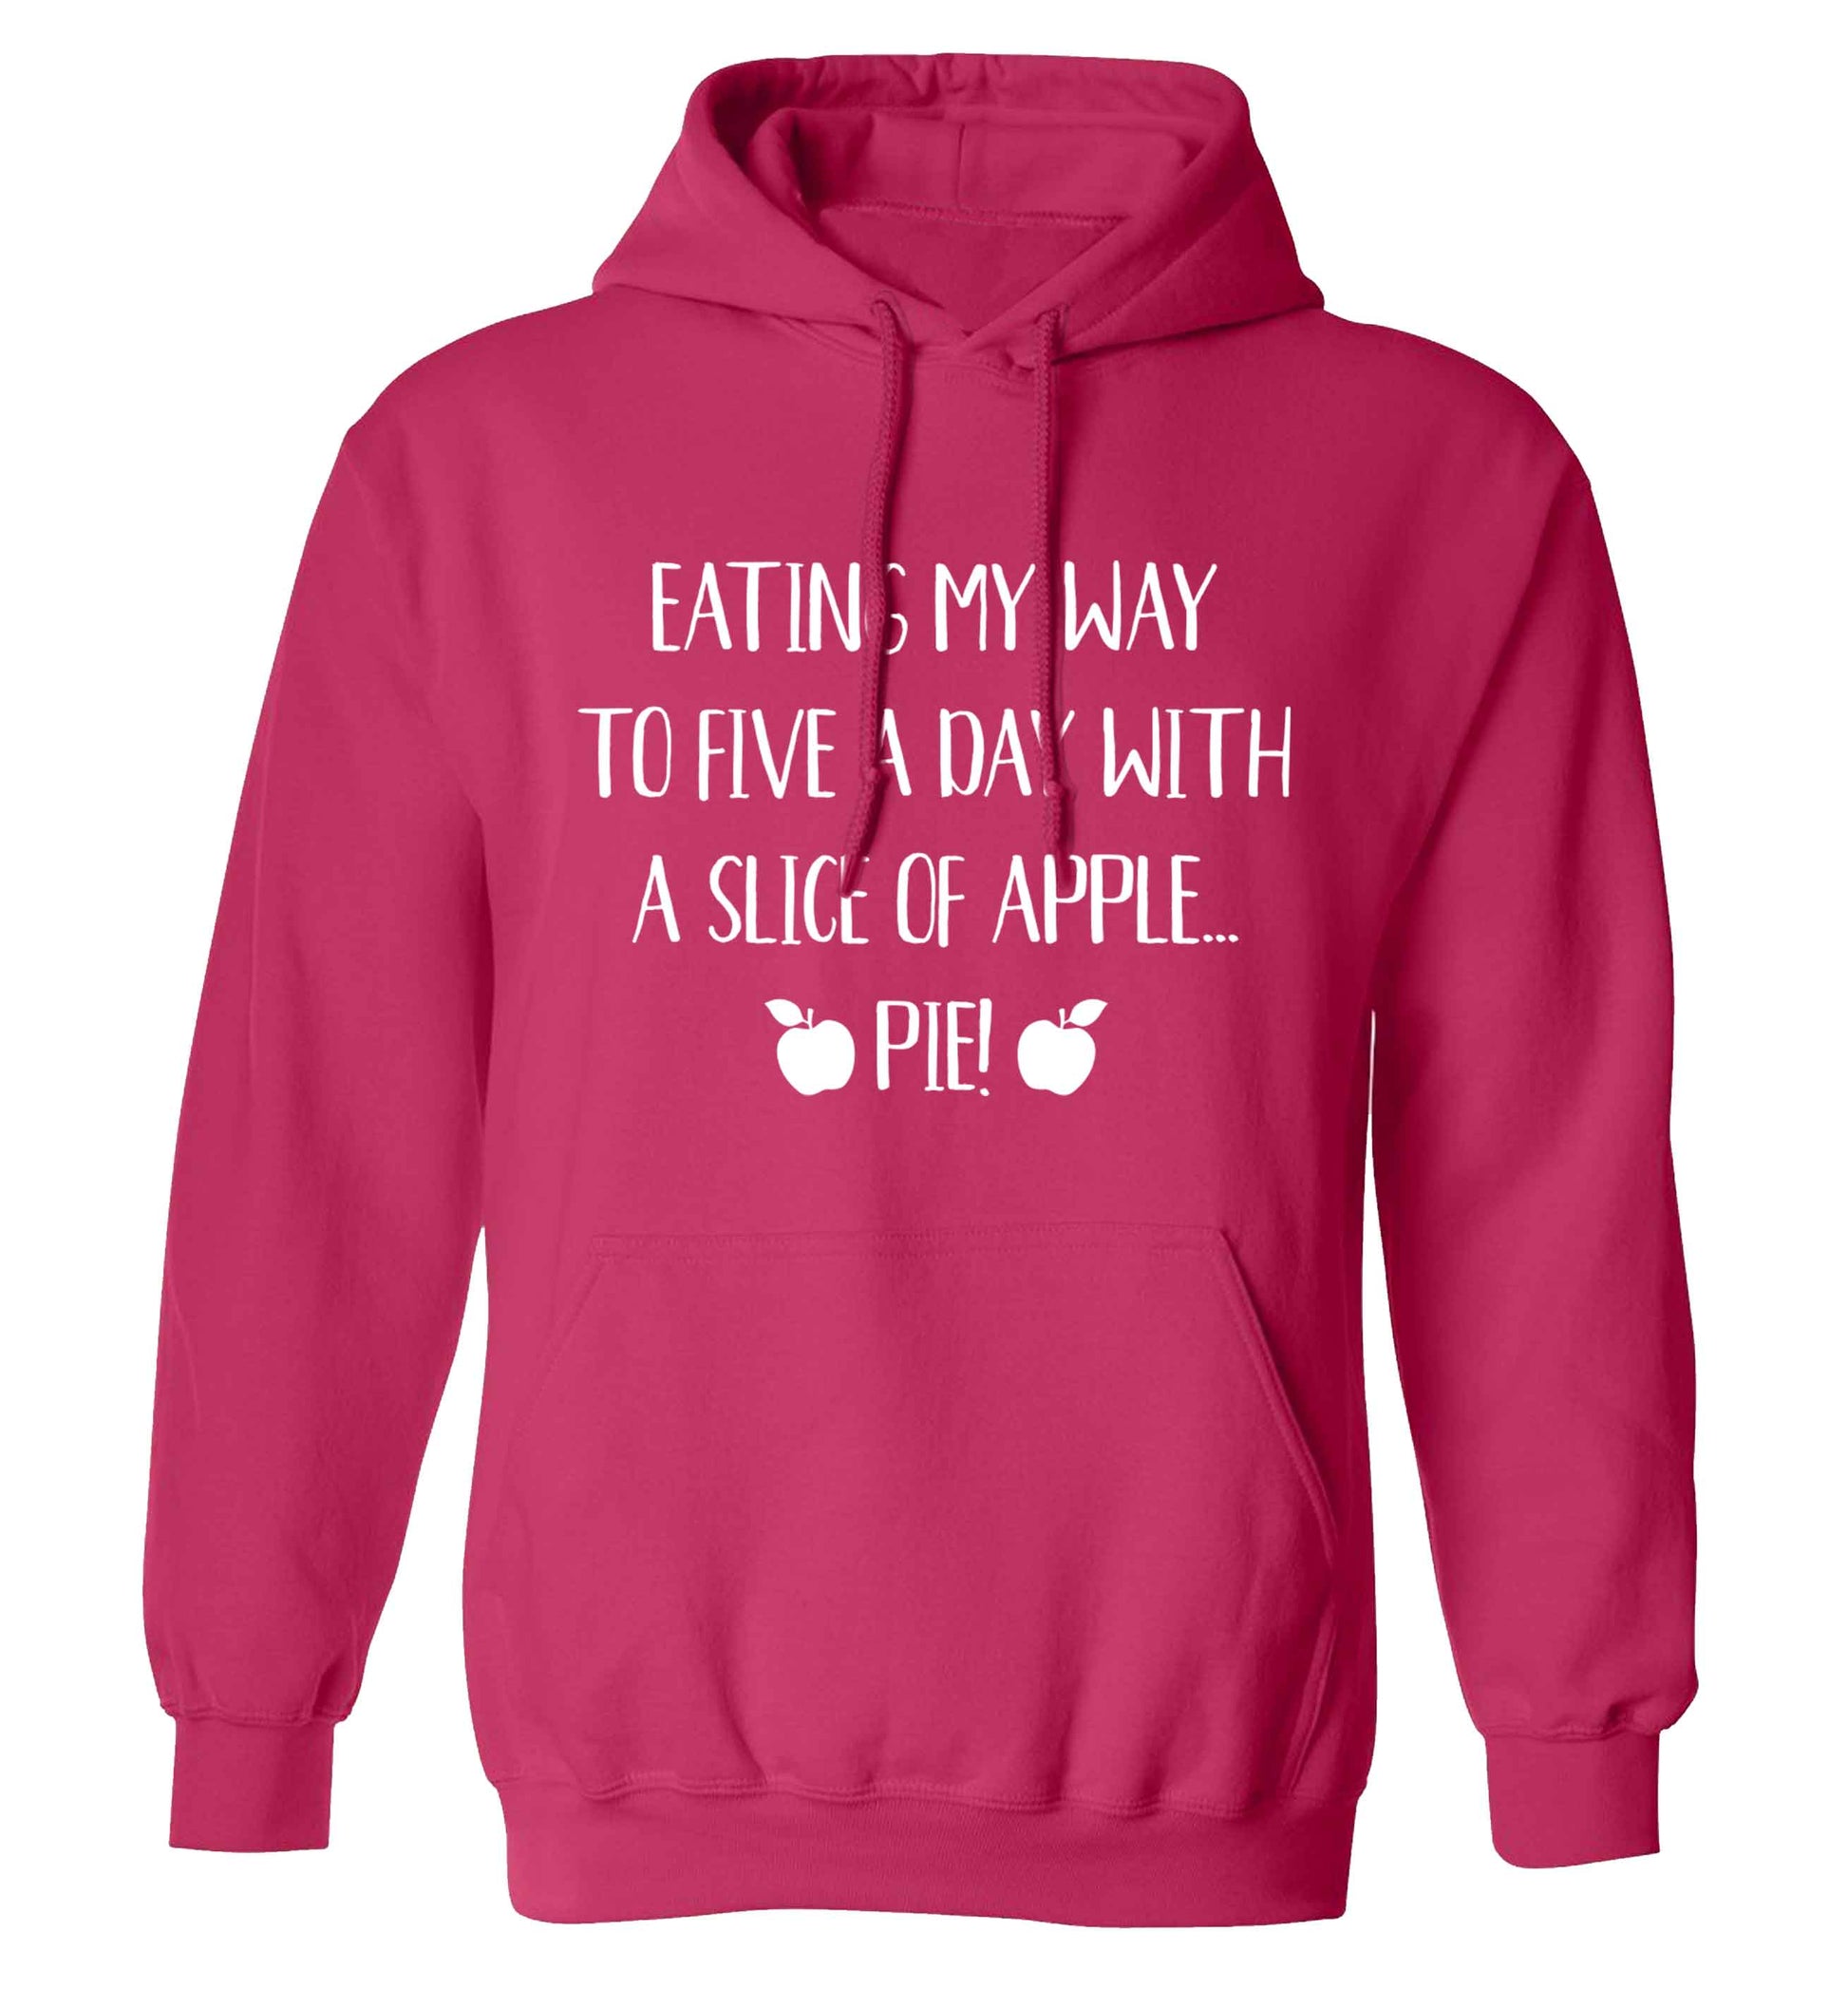 Eating my way to five a day with a slice of apple pie adults unisex pink hoodie 2XL